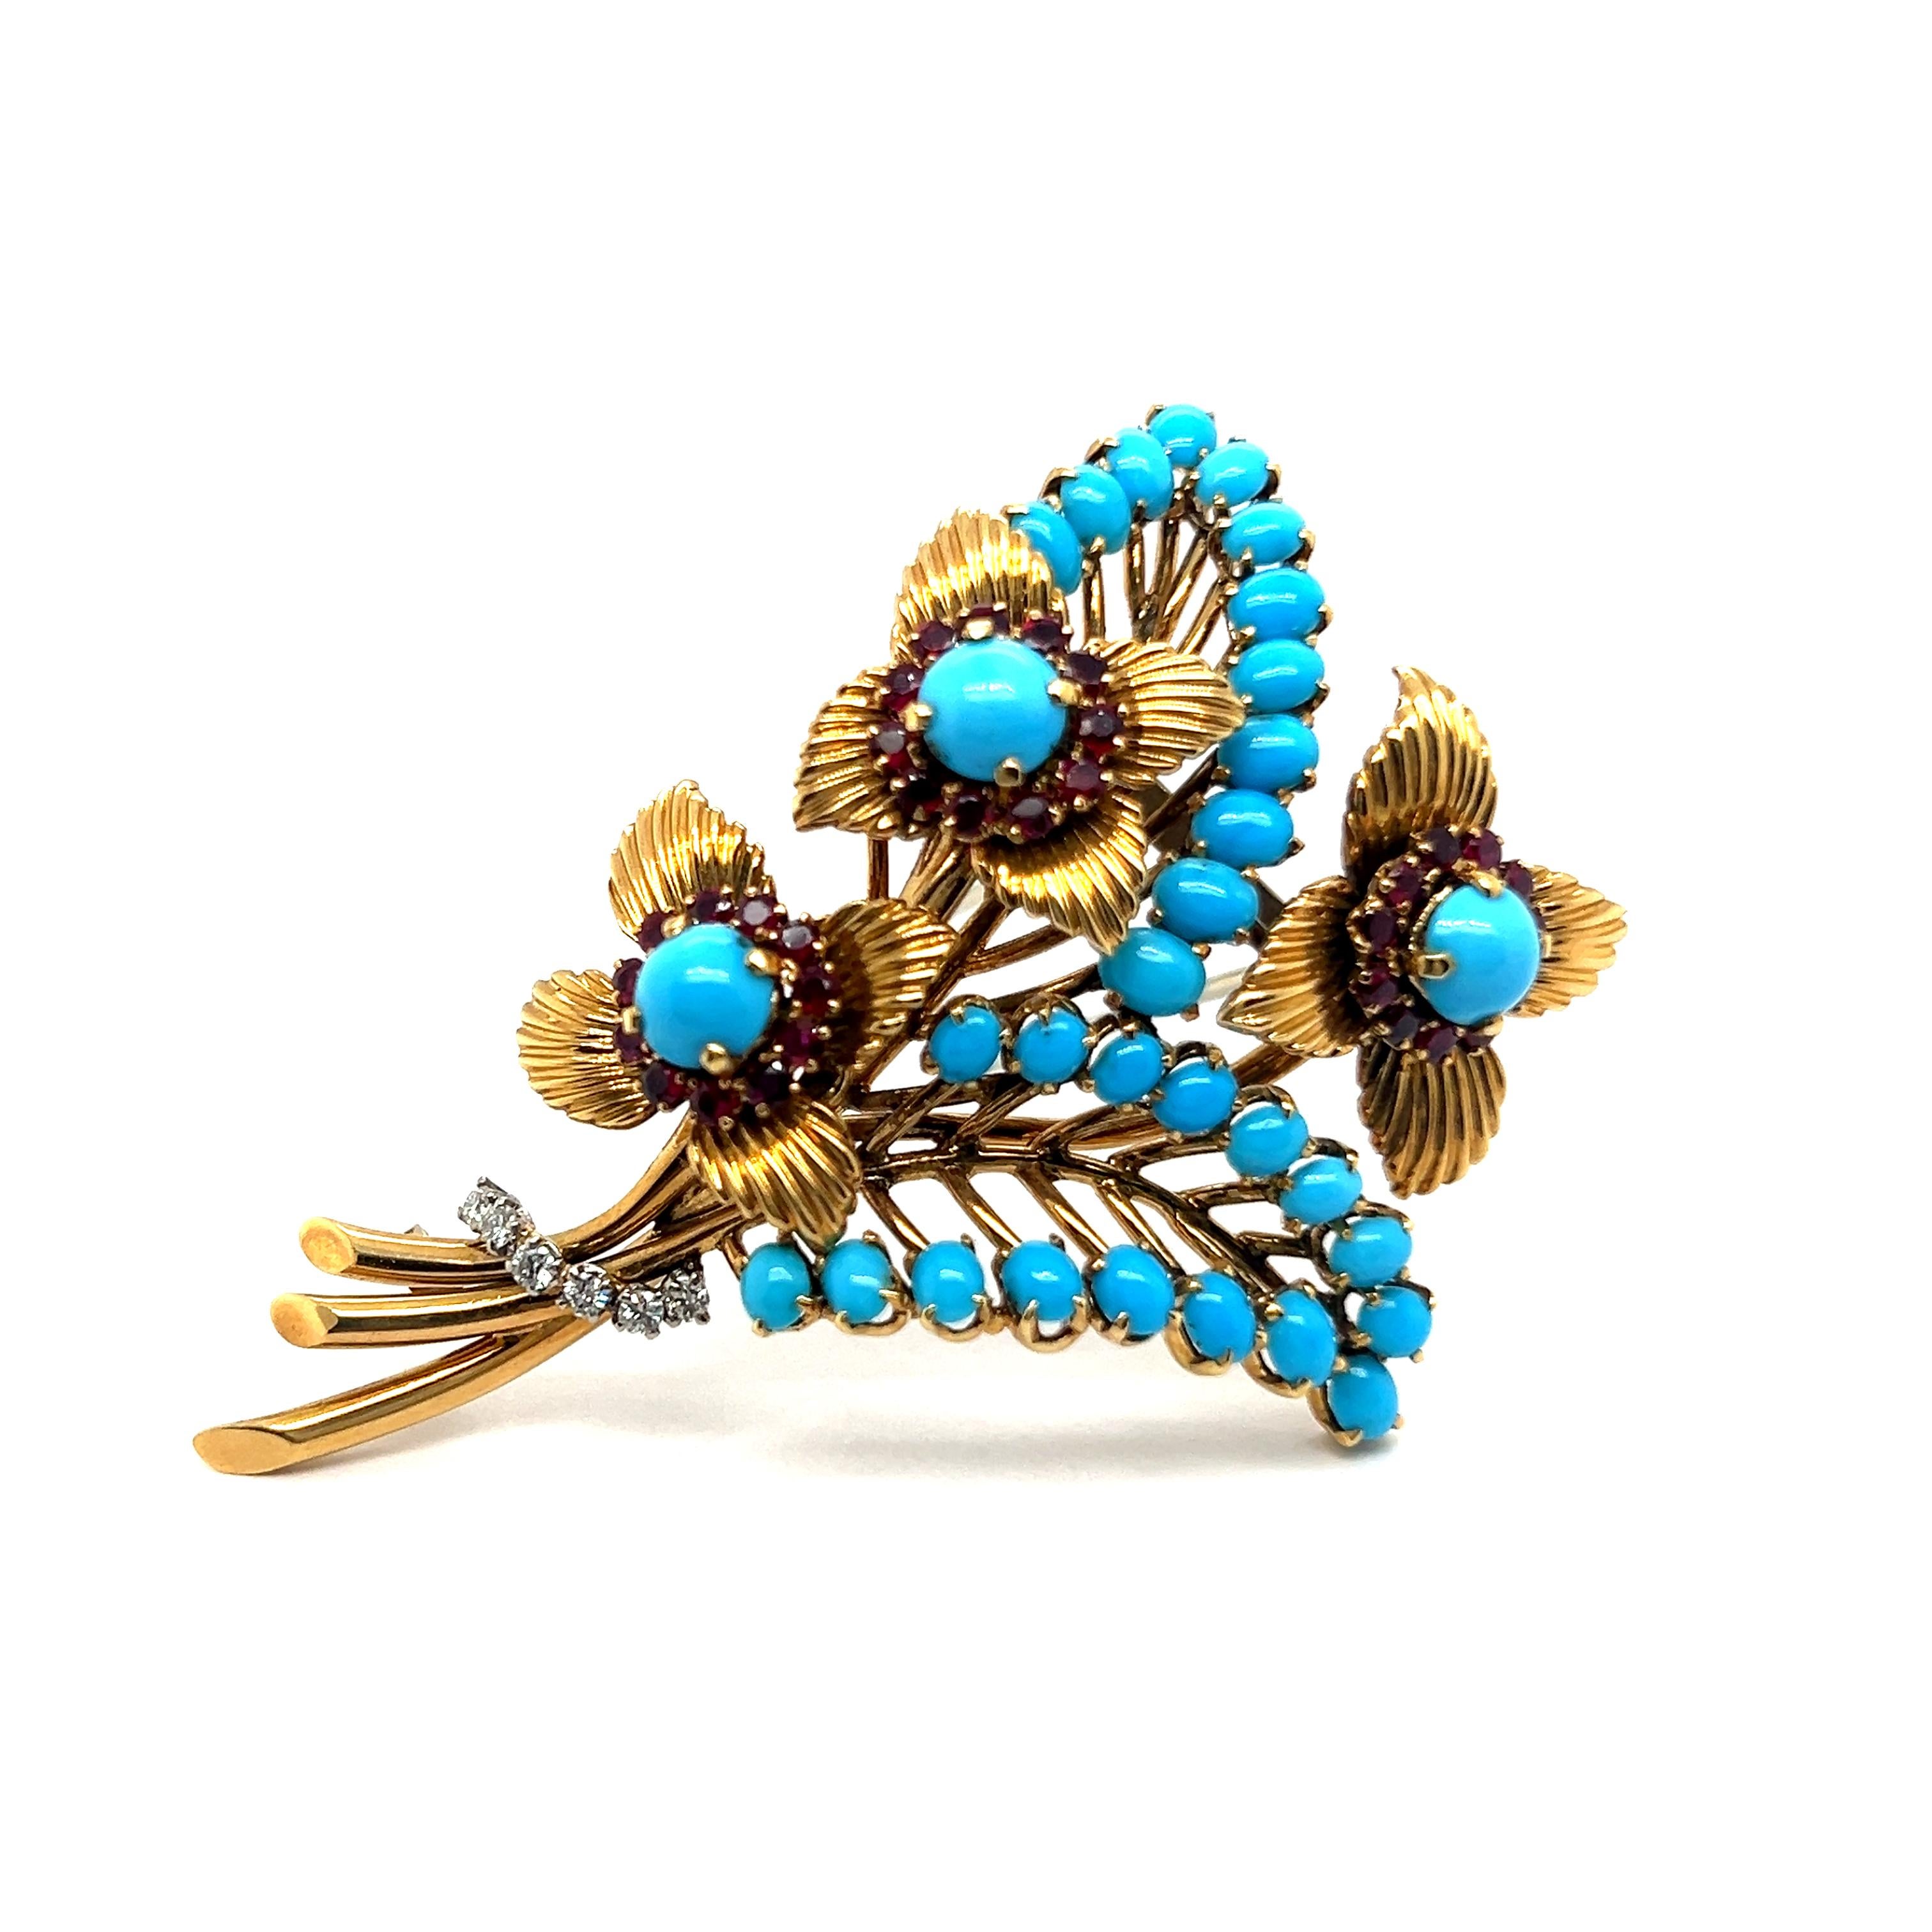 Brooch with Turquoise, Rubies & Diamonds in 18 Karat Yellow Gold by Gübelin For Sale 10